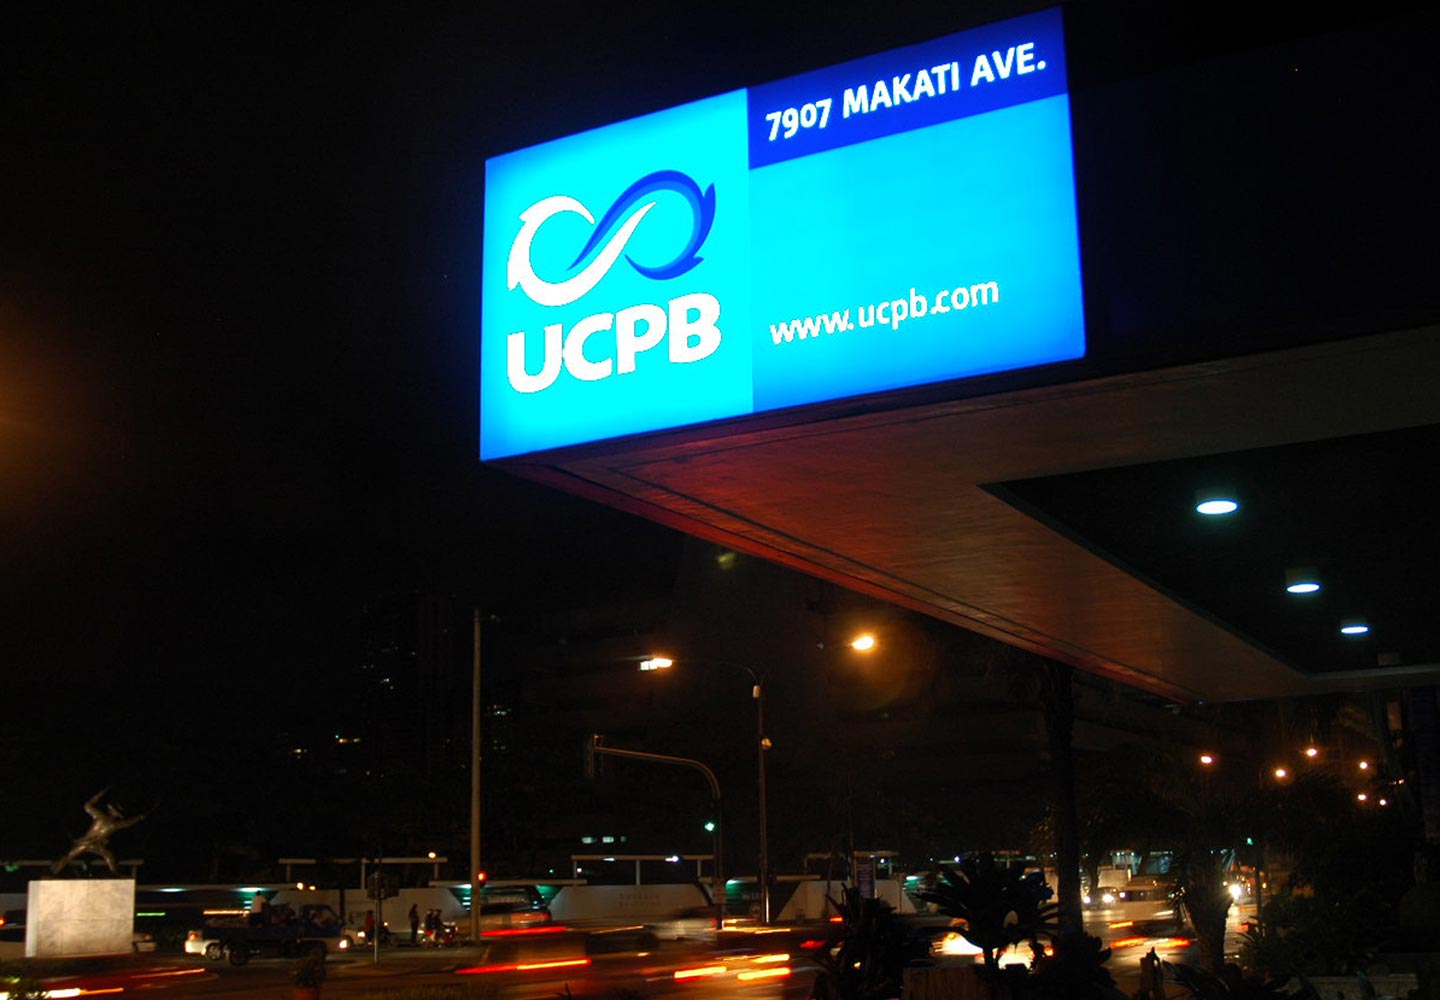 Brand Consultancy in Financial Services Industry. Signage for UCPB.